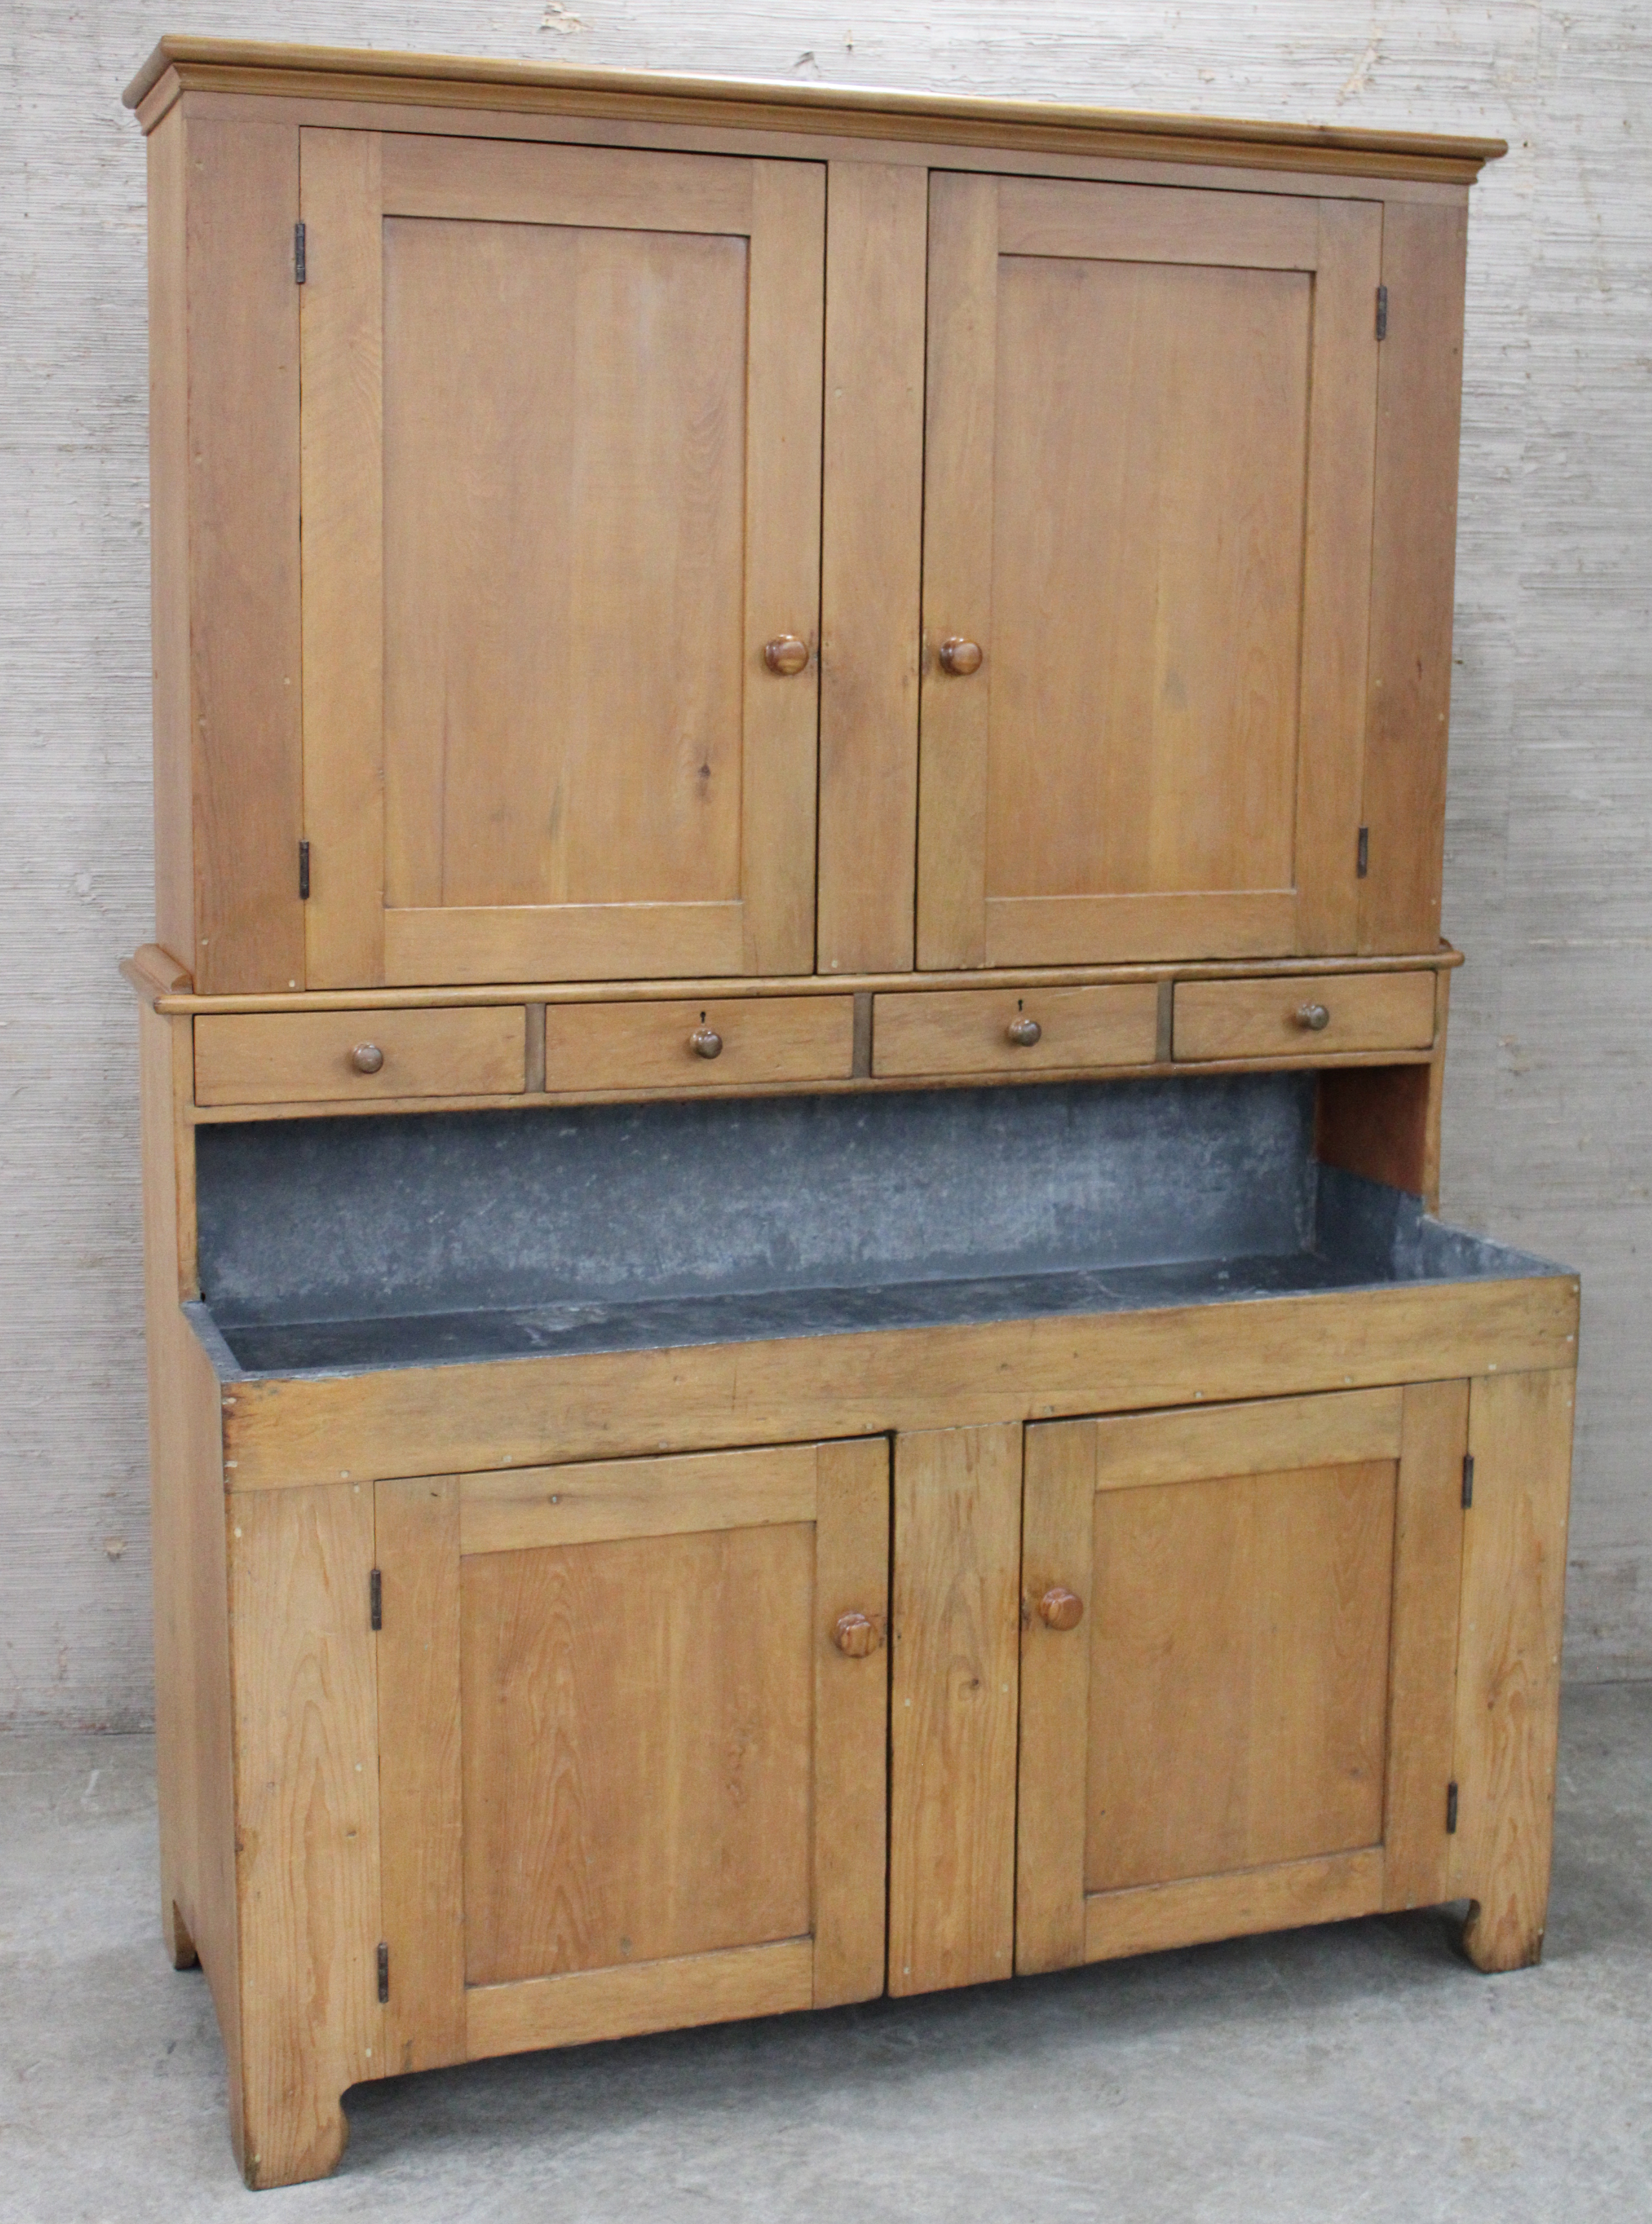 EARLY AMERICAN HEART PINE KITCHEN 35ef91